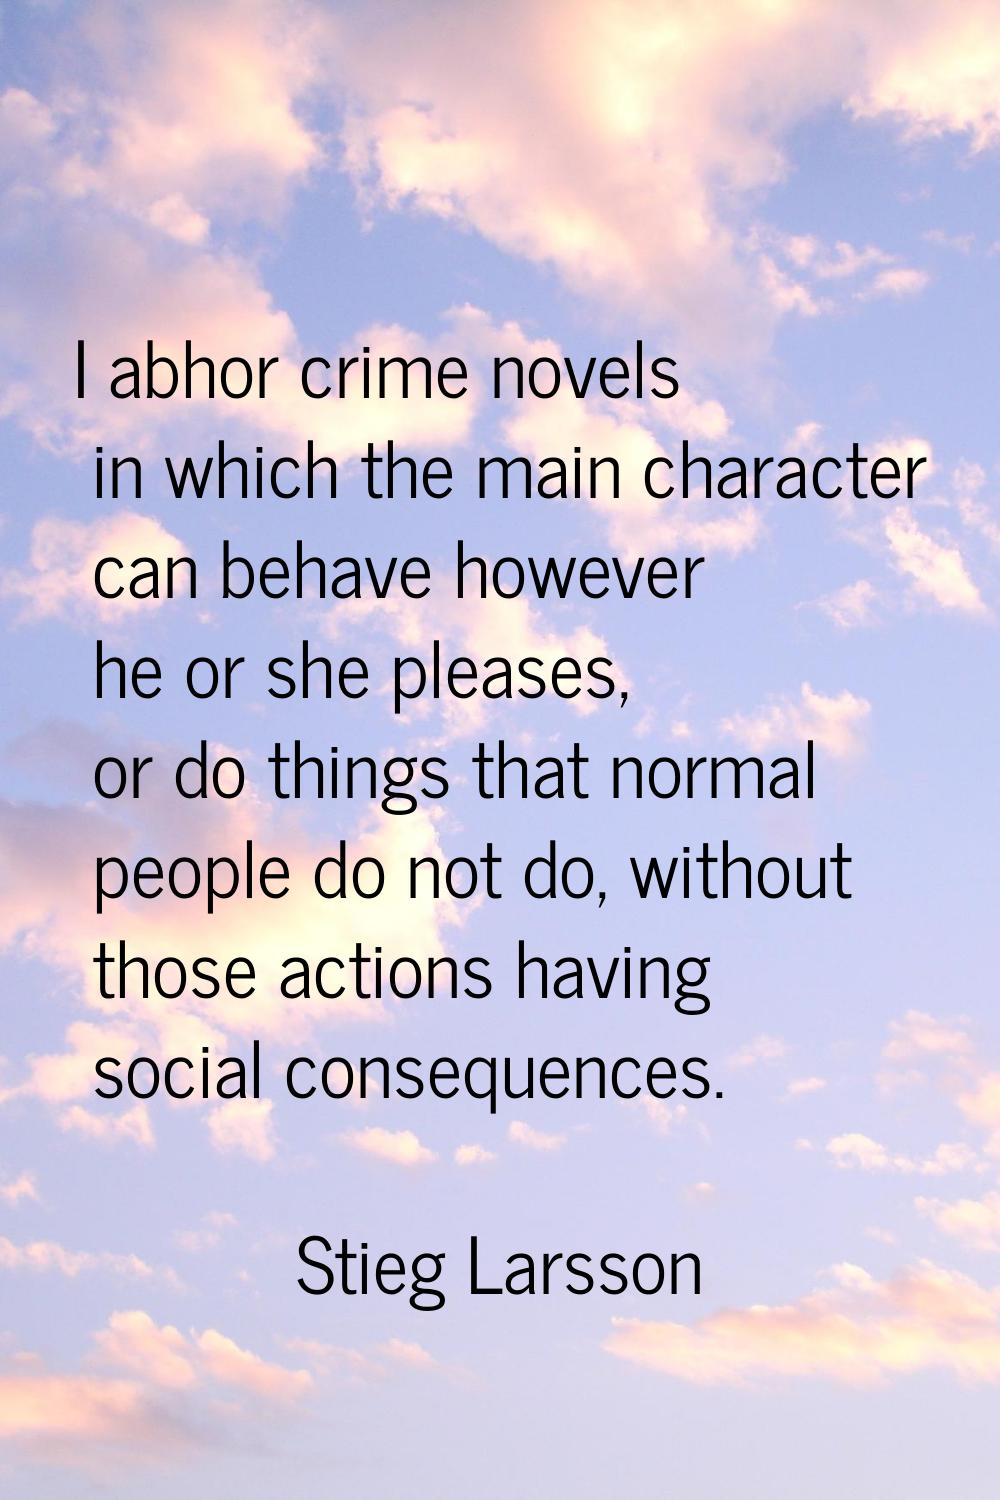 I abhor crime novels in which the main character can behave however he or she pleases, or do things